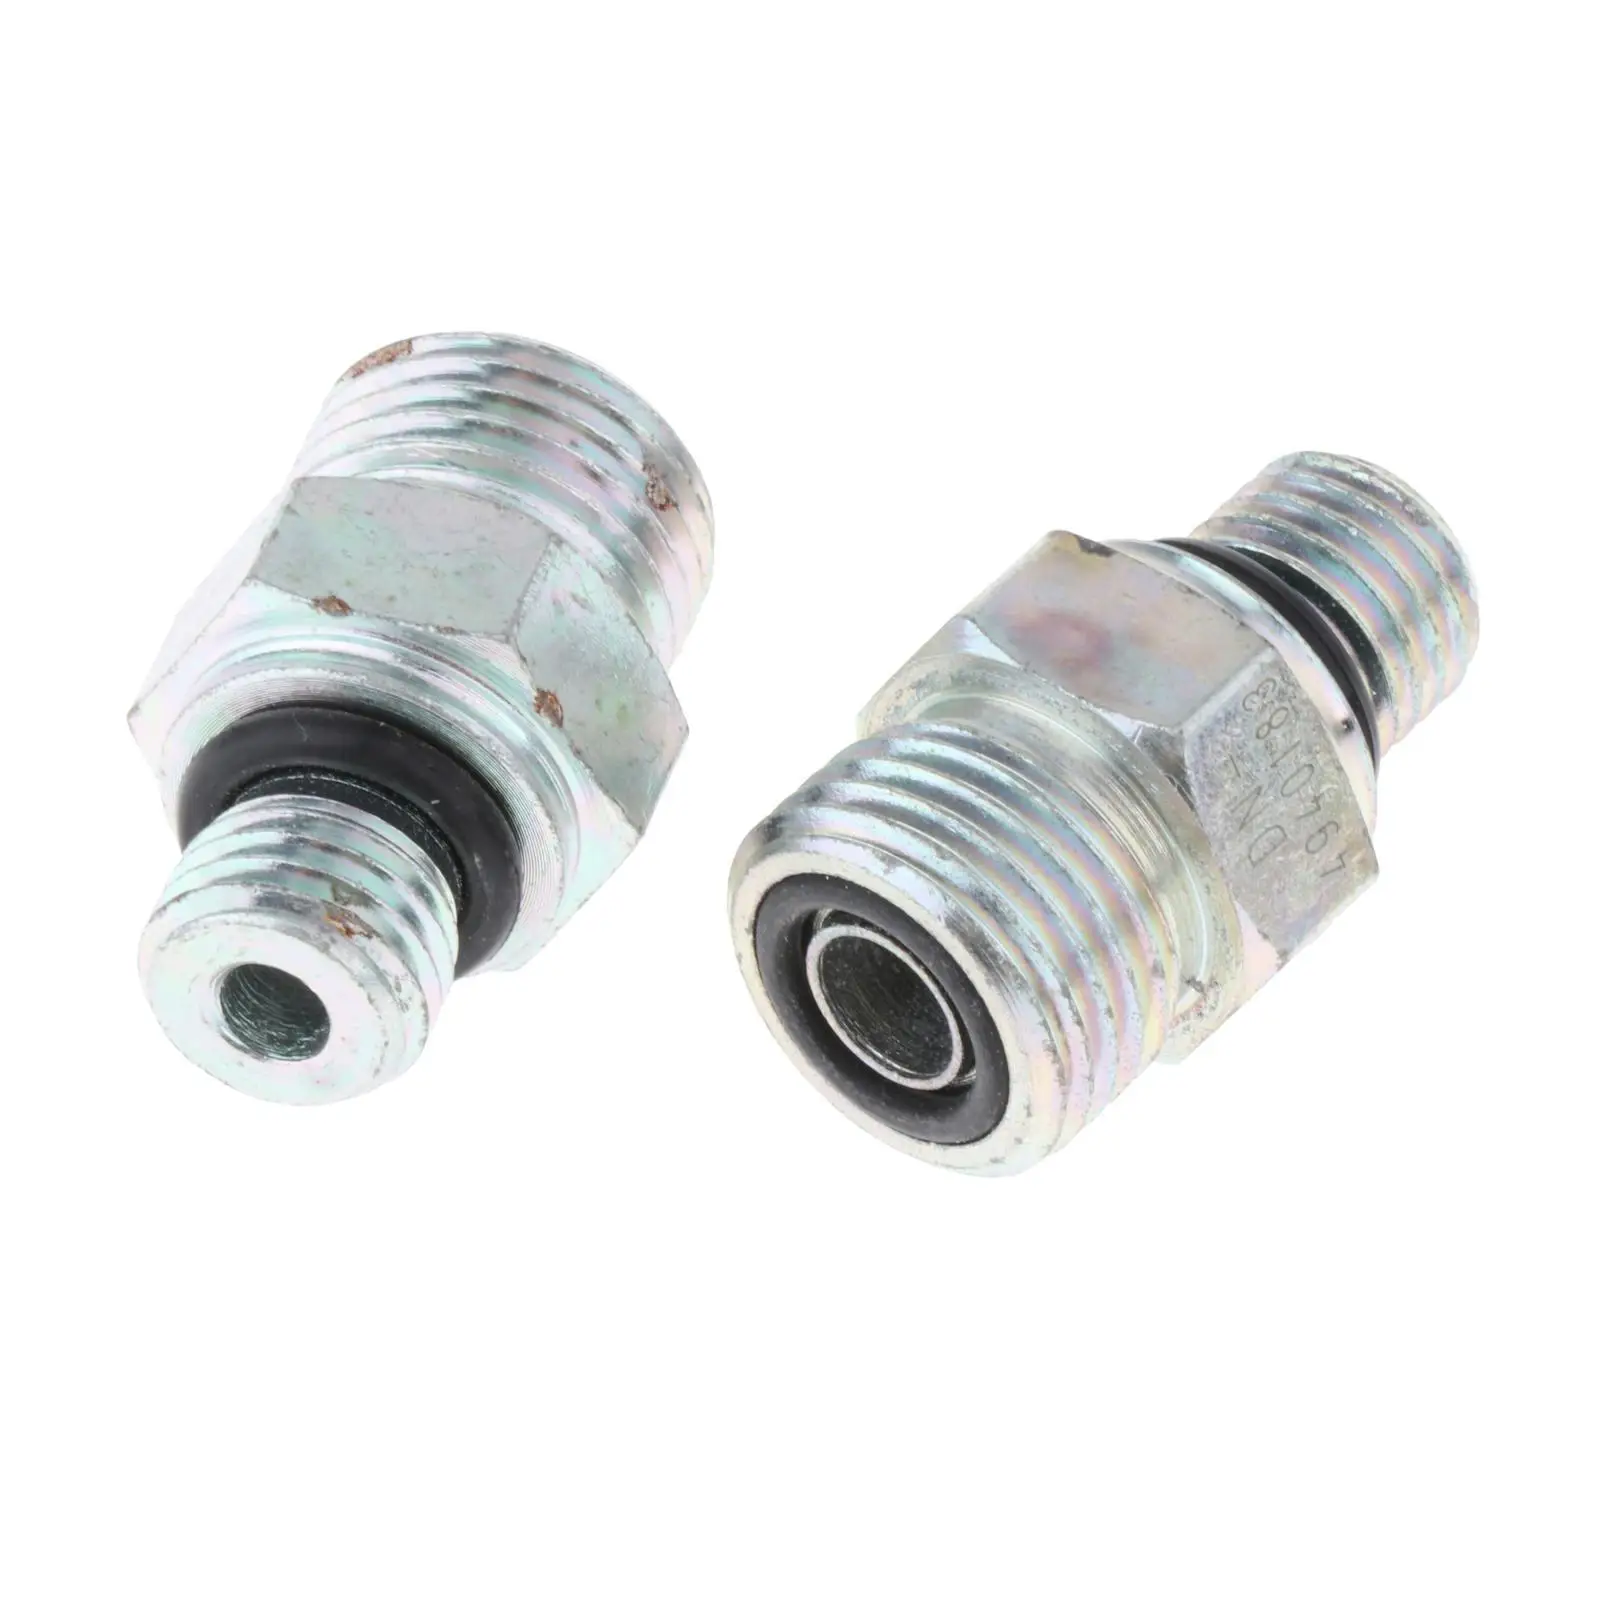 2 Pieces Turbo Oil Supply Line Fitting Hardware Accessories with O Rings for Auto Parts Car Automotive Vehicle Engine Parts